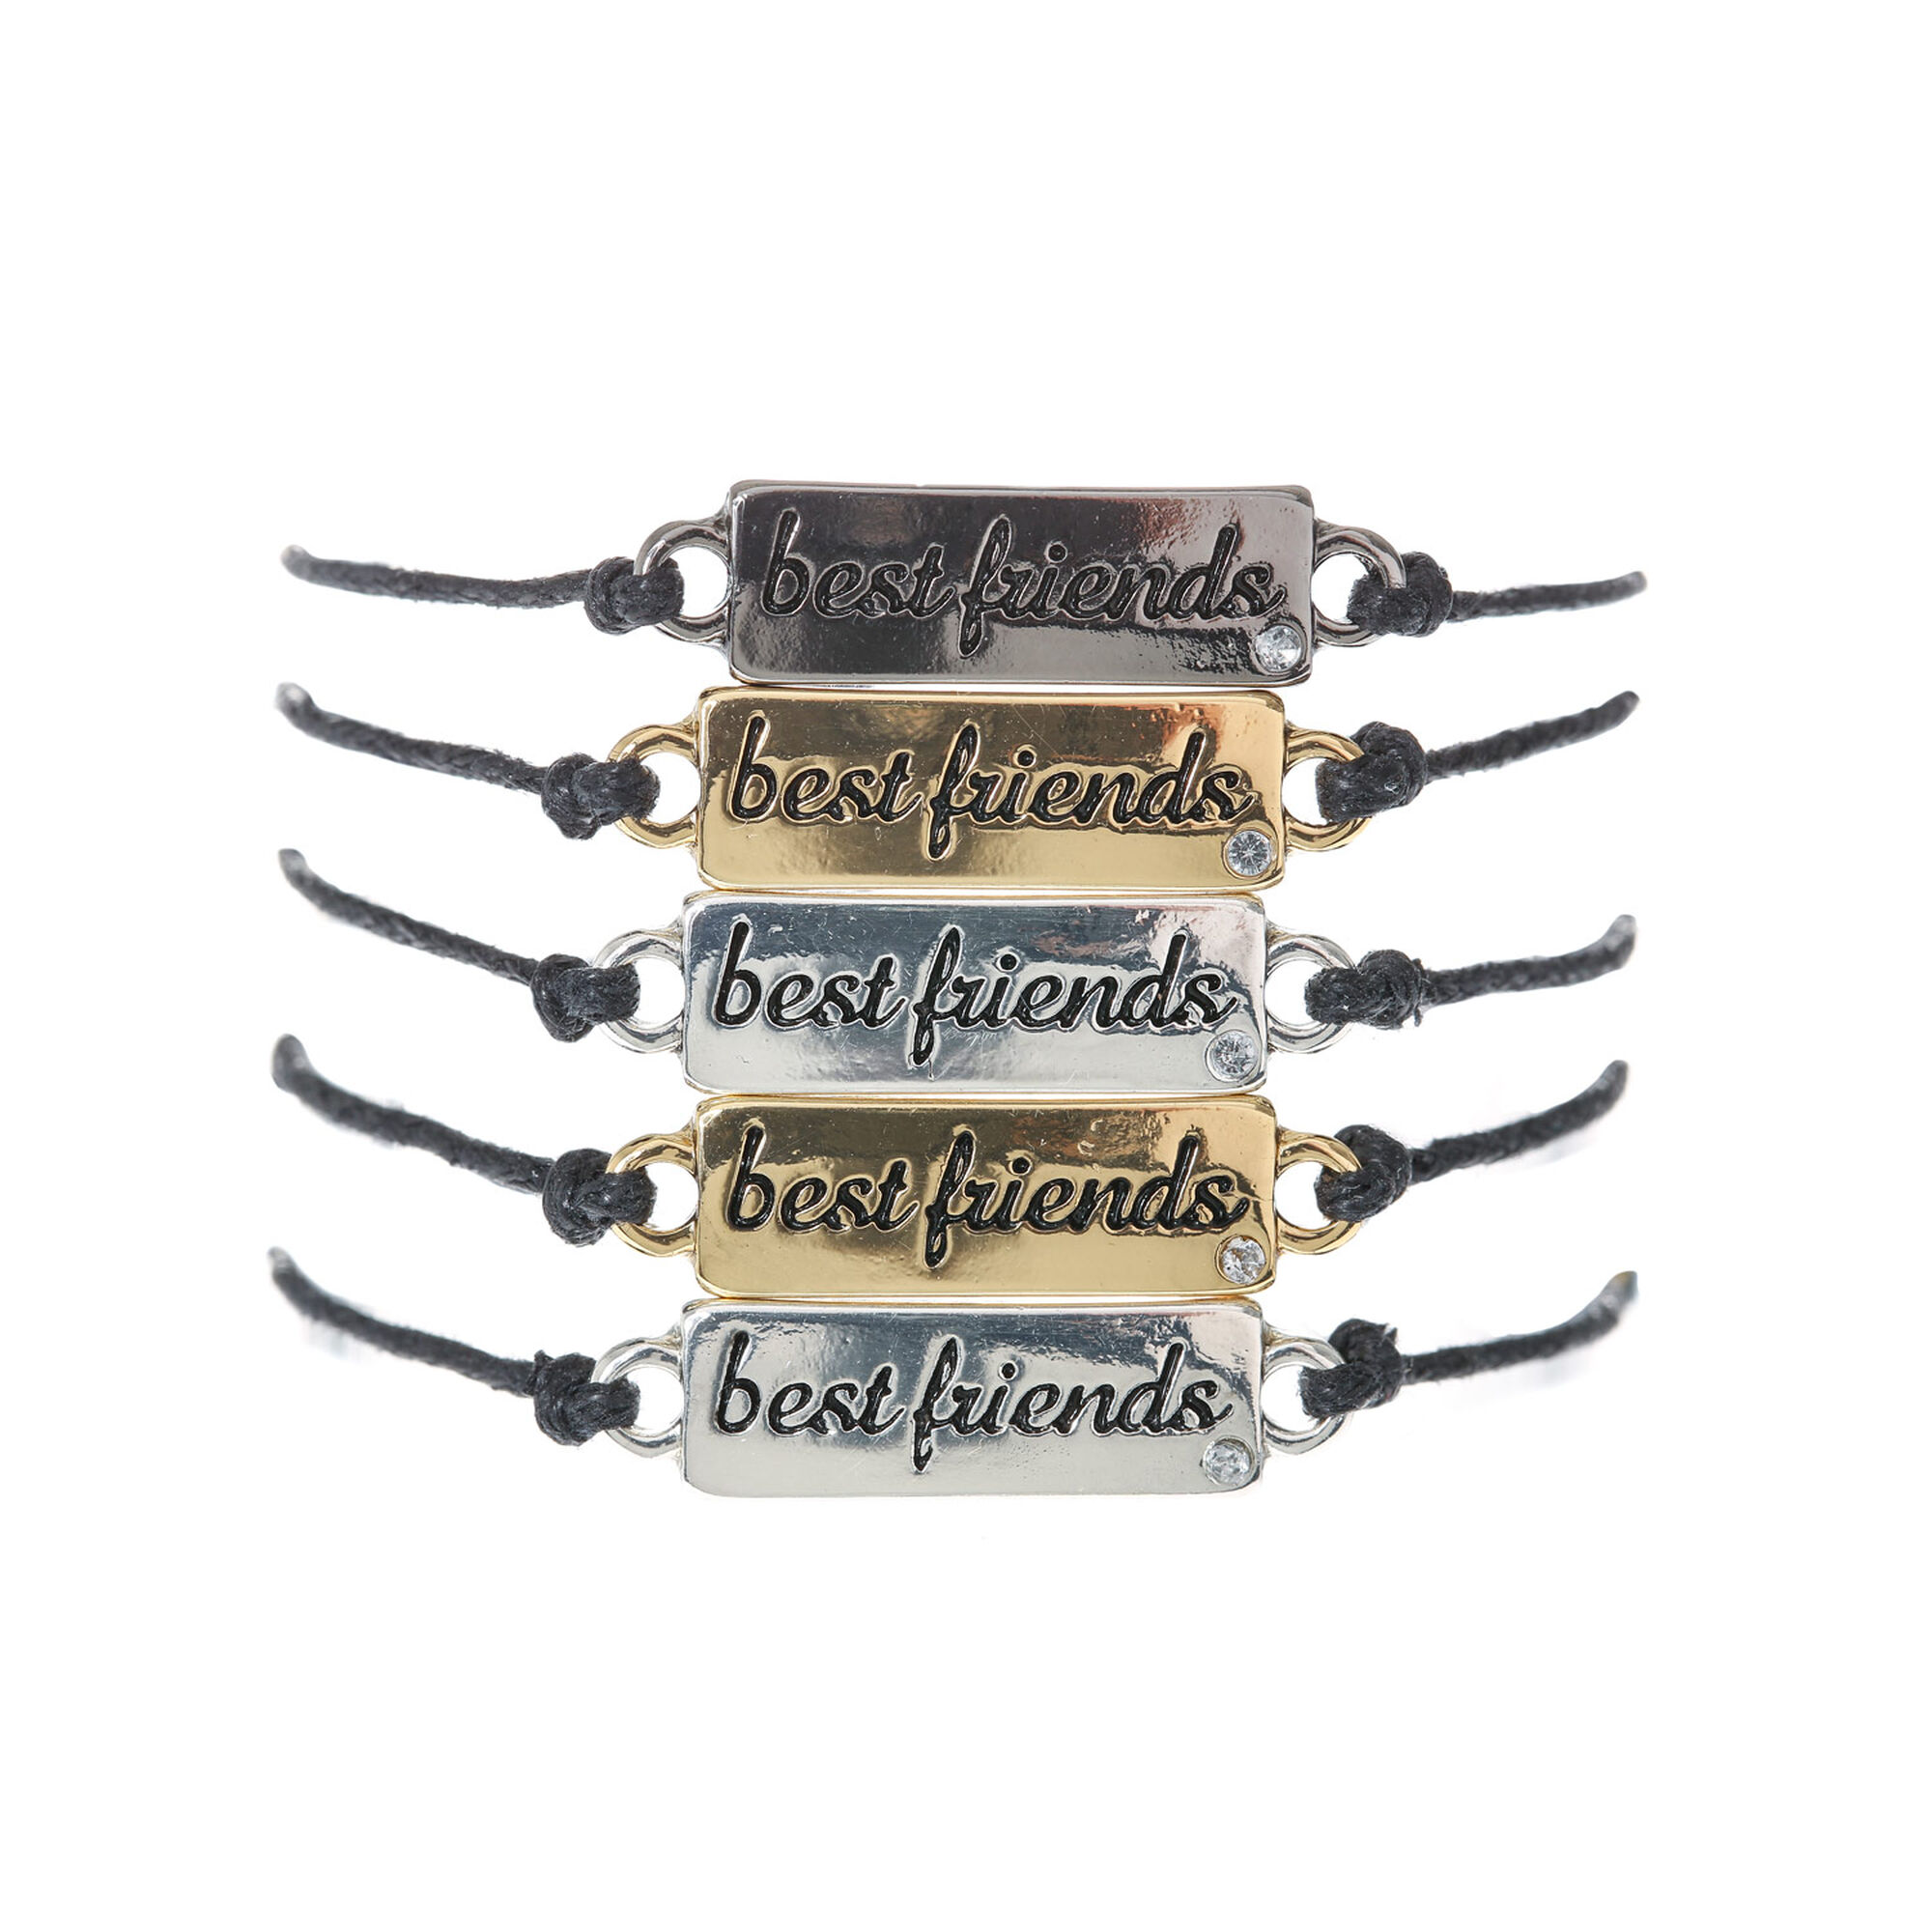 View Claires Mixed Metal Adjustable Friendship Bracelets 5 Pack Silver information